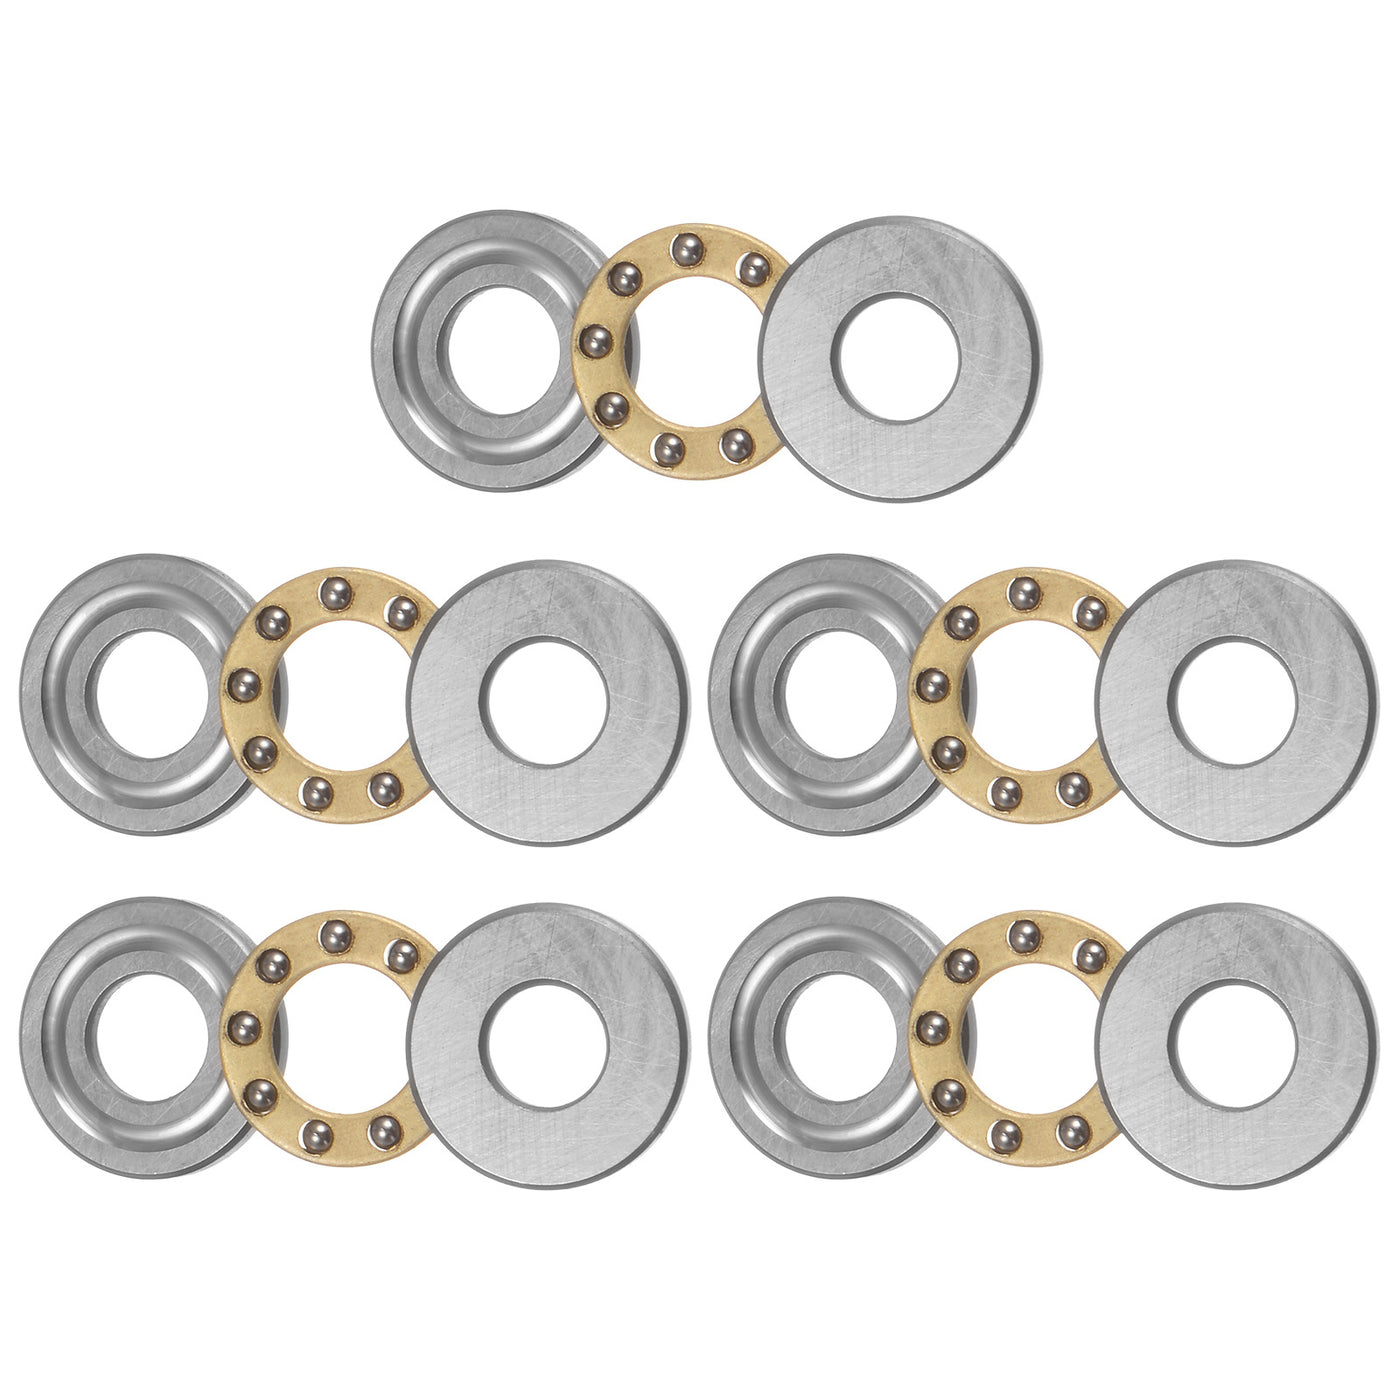 uxcell Uxcell F5-12M Thrust Ball Bearing 5x12x4mm Brass with Washers 5pcs